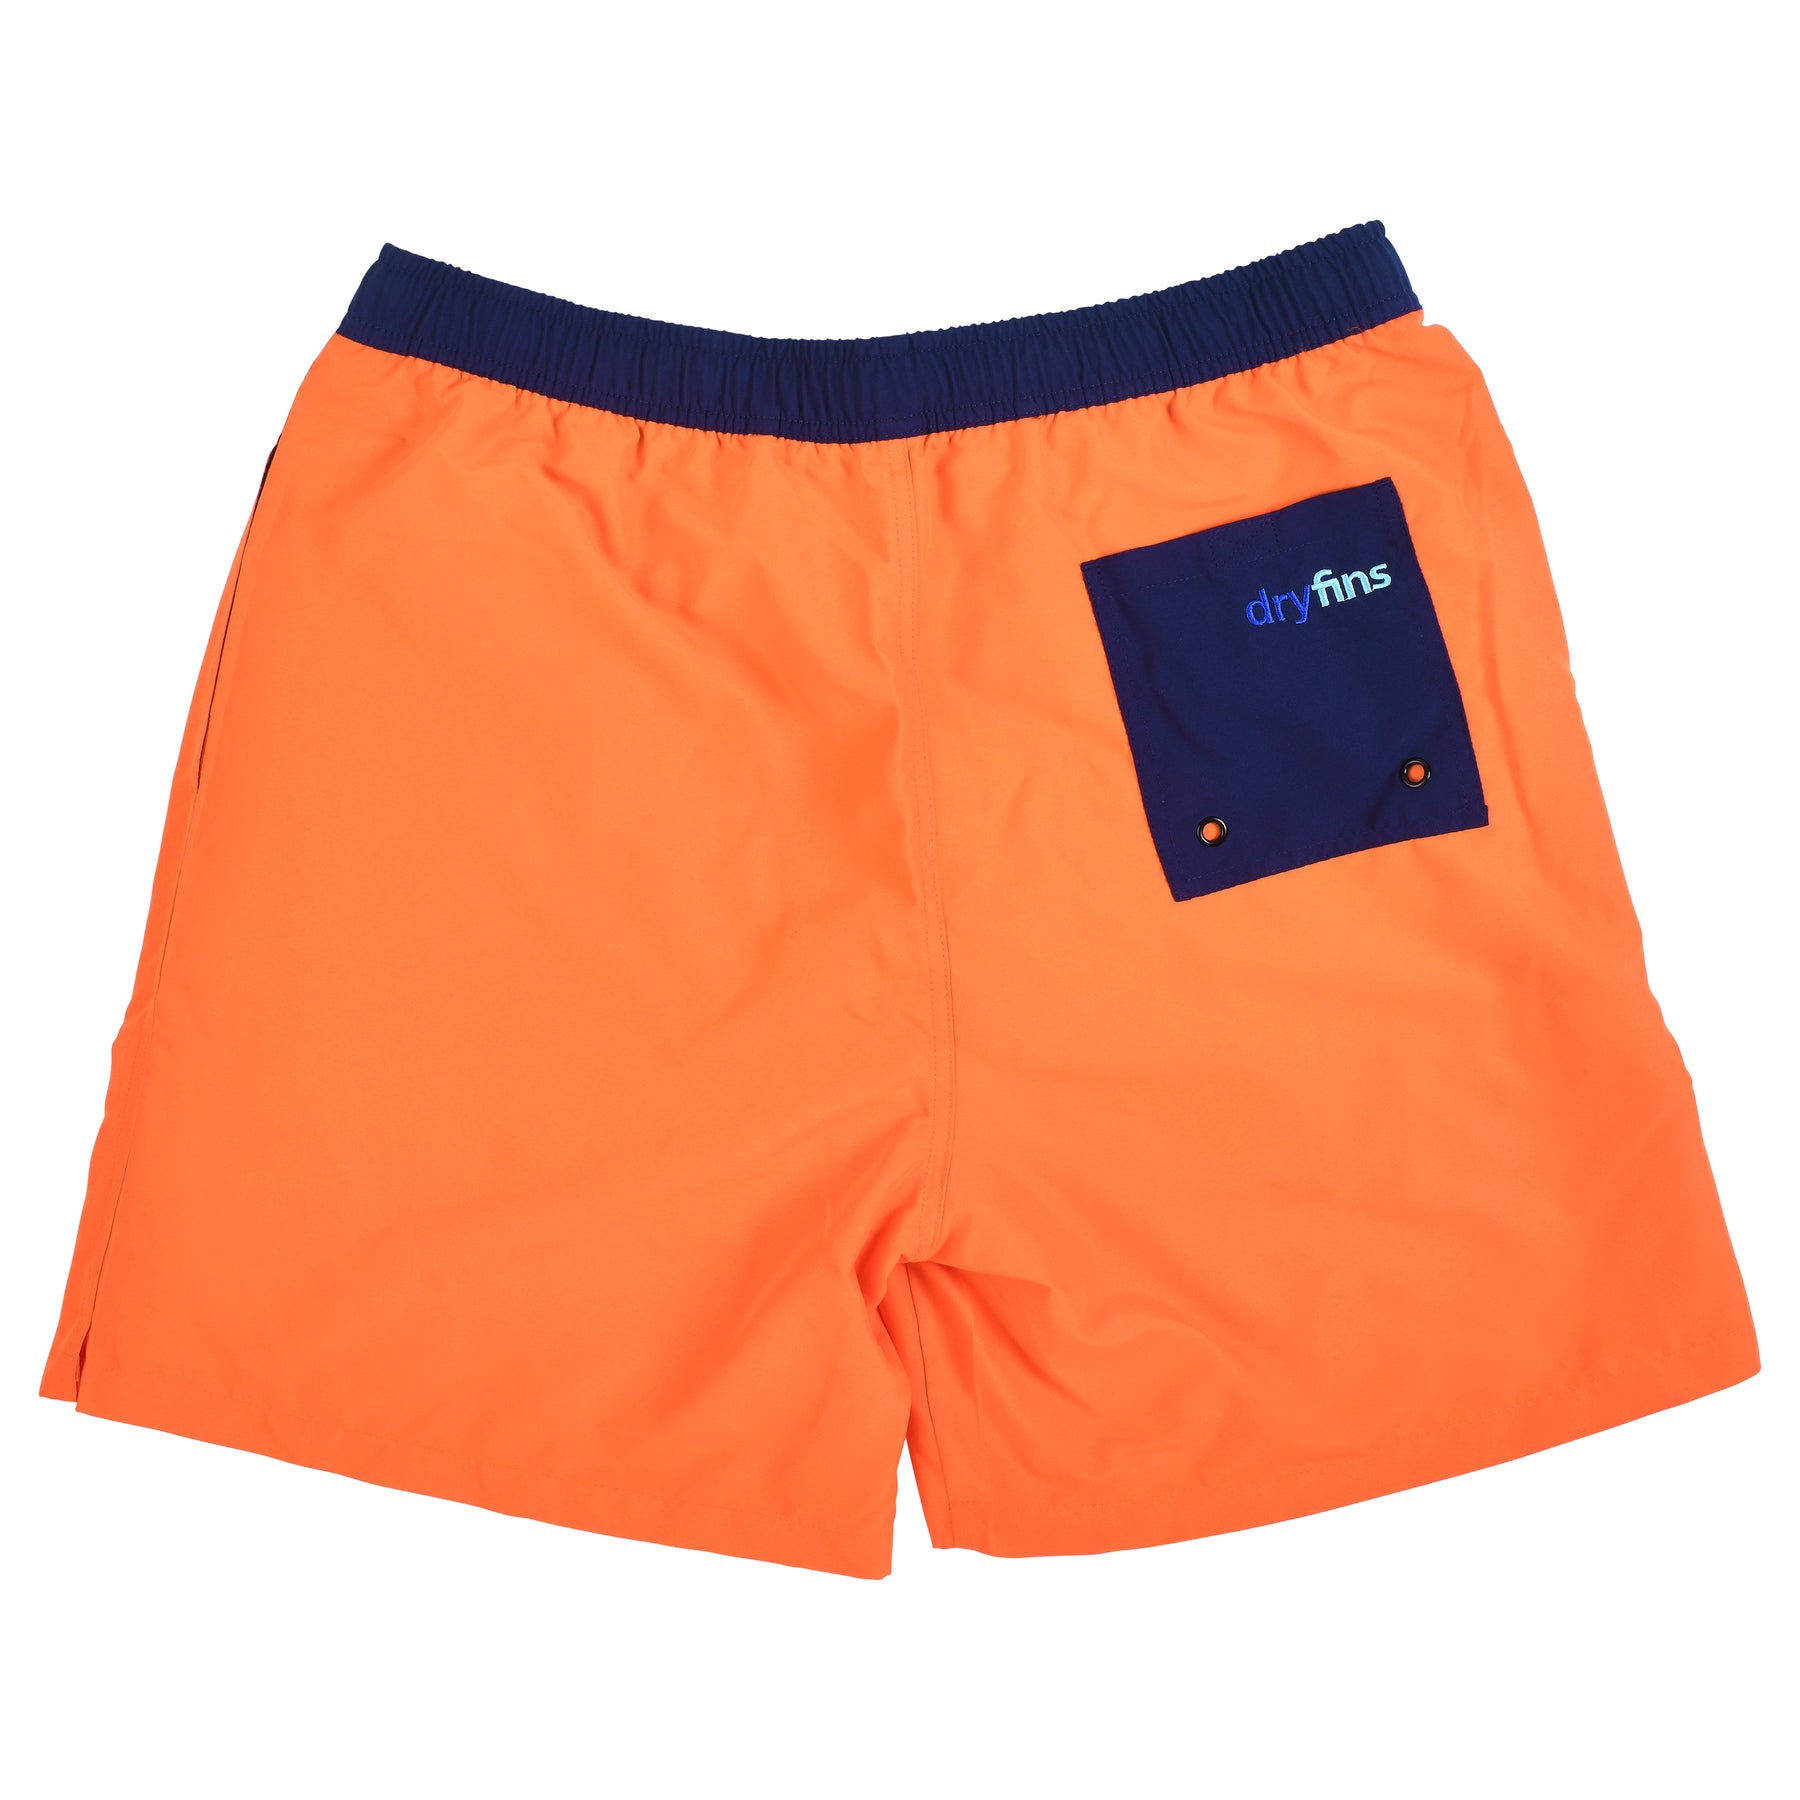 DryFins Mens Swim Trunks No Chafe Board Shorts Quick Dry with Boxer Brief  Liner